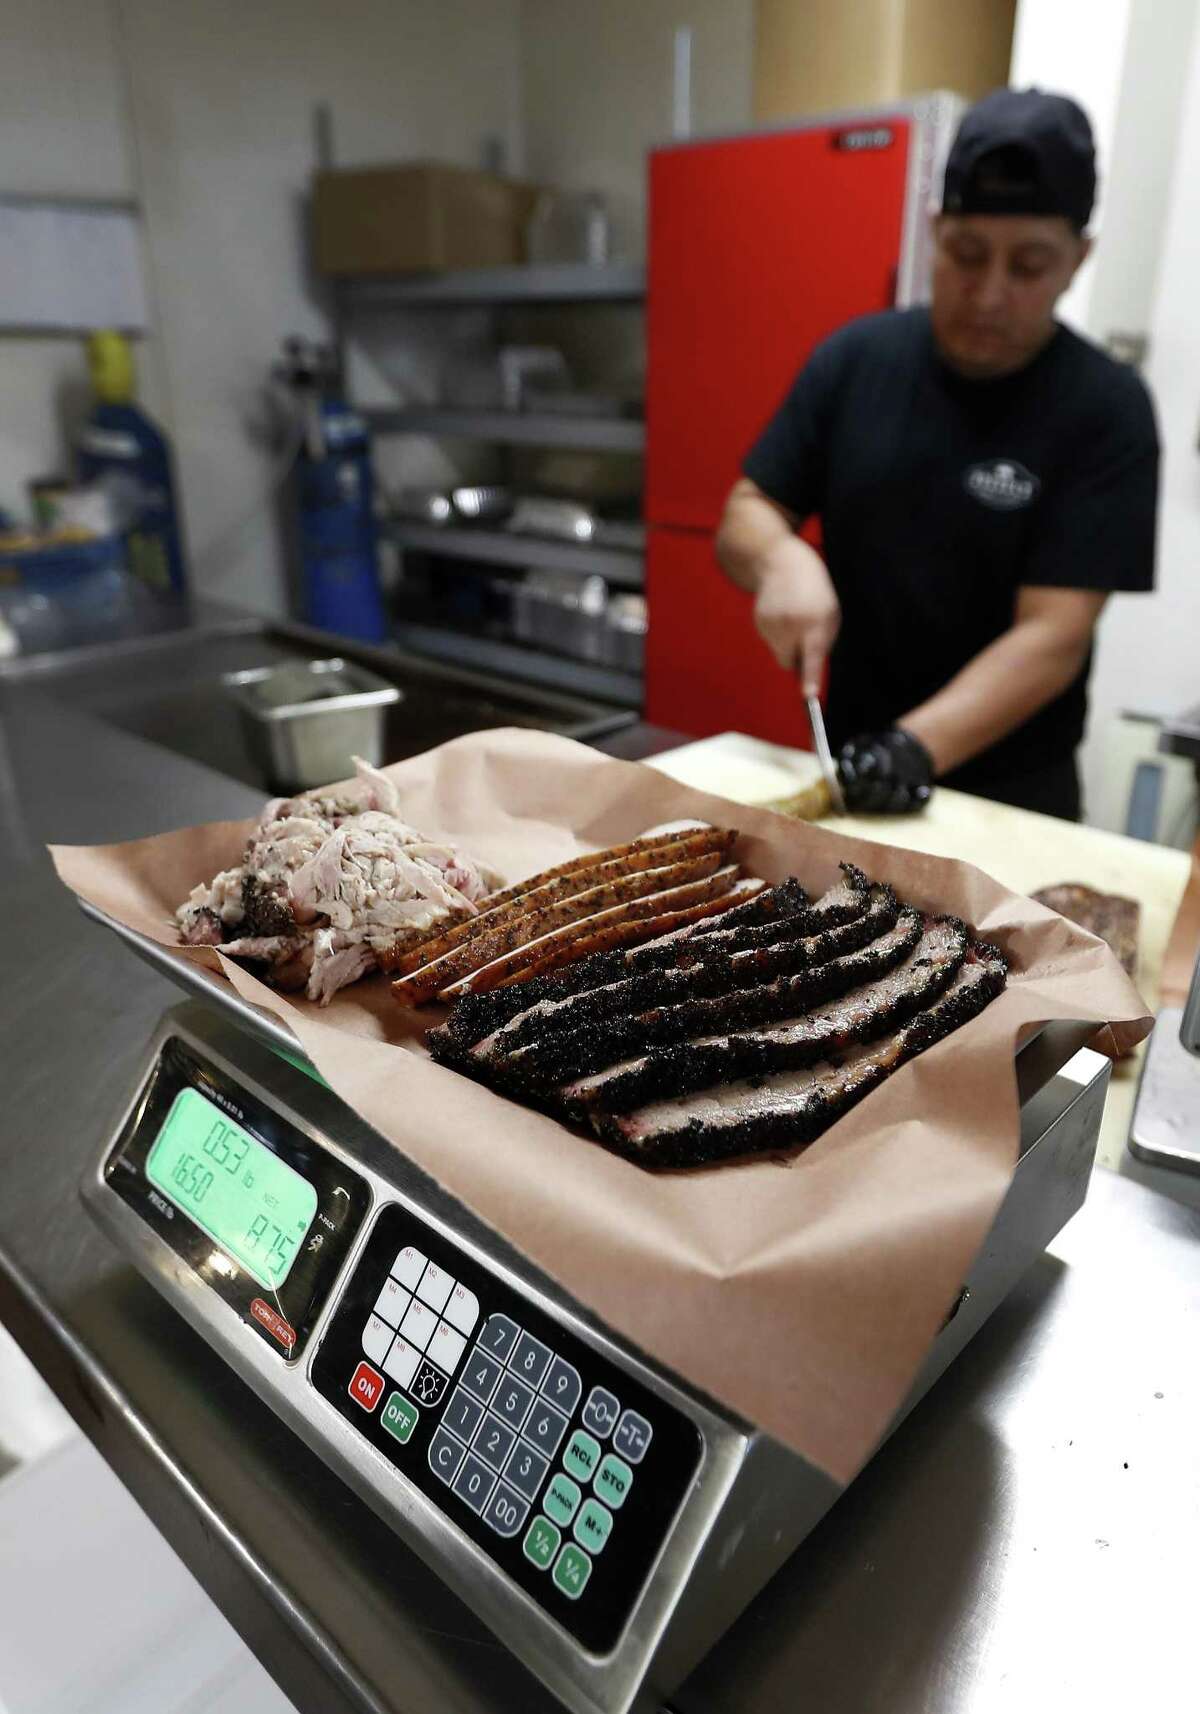 Russell Roegels of Roegels Barbecue Company, weighs meat on a scale behind the cash register, after Gudiel Tumax cuts it, Saturday, June 30, 2018, in Houston. Agriculture Commissioner Sid Miller has waged a war on BBQ joints, fining them for failing to follow rules the attorney general has said won?’t hold up in court. ( Karen Warren / Houston Chronicle )